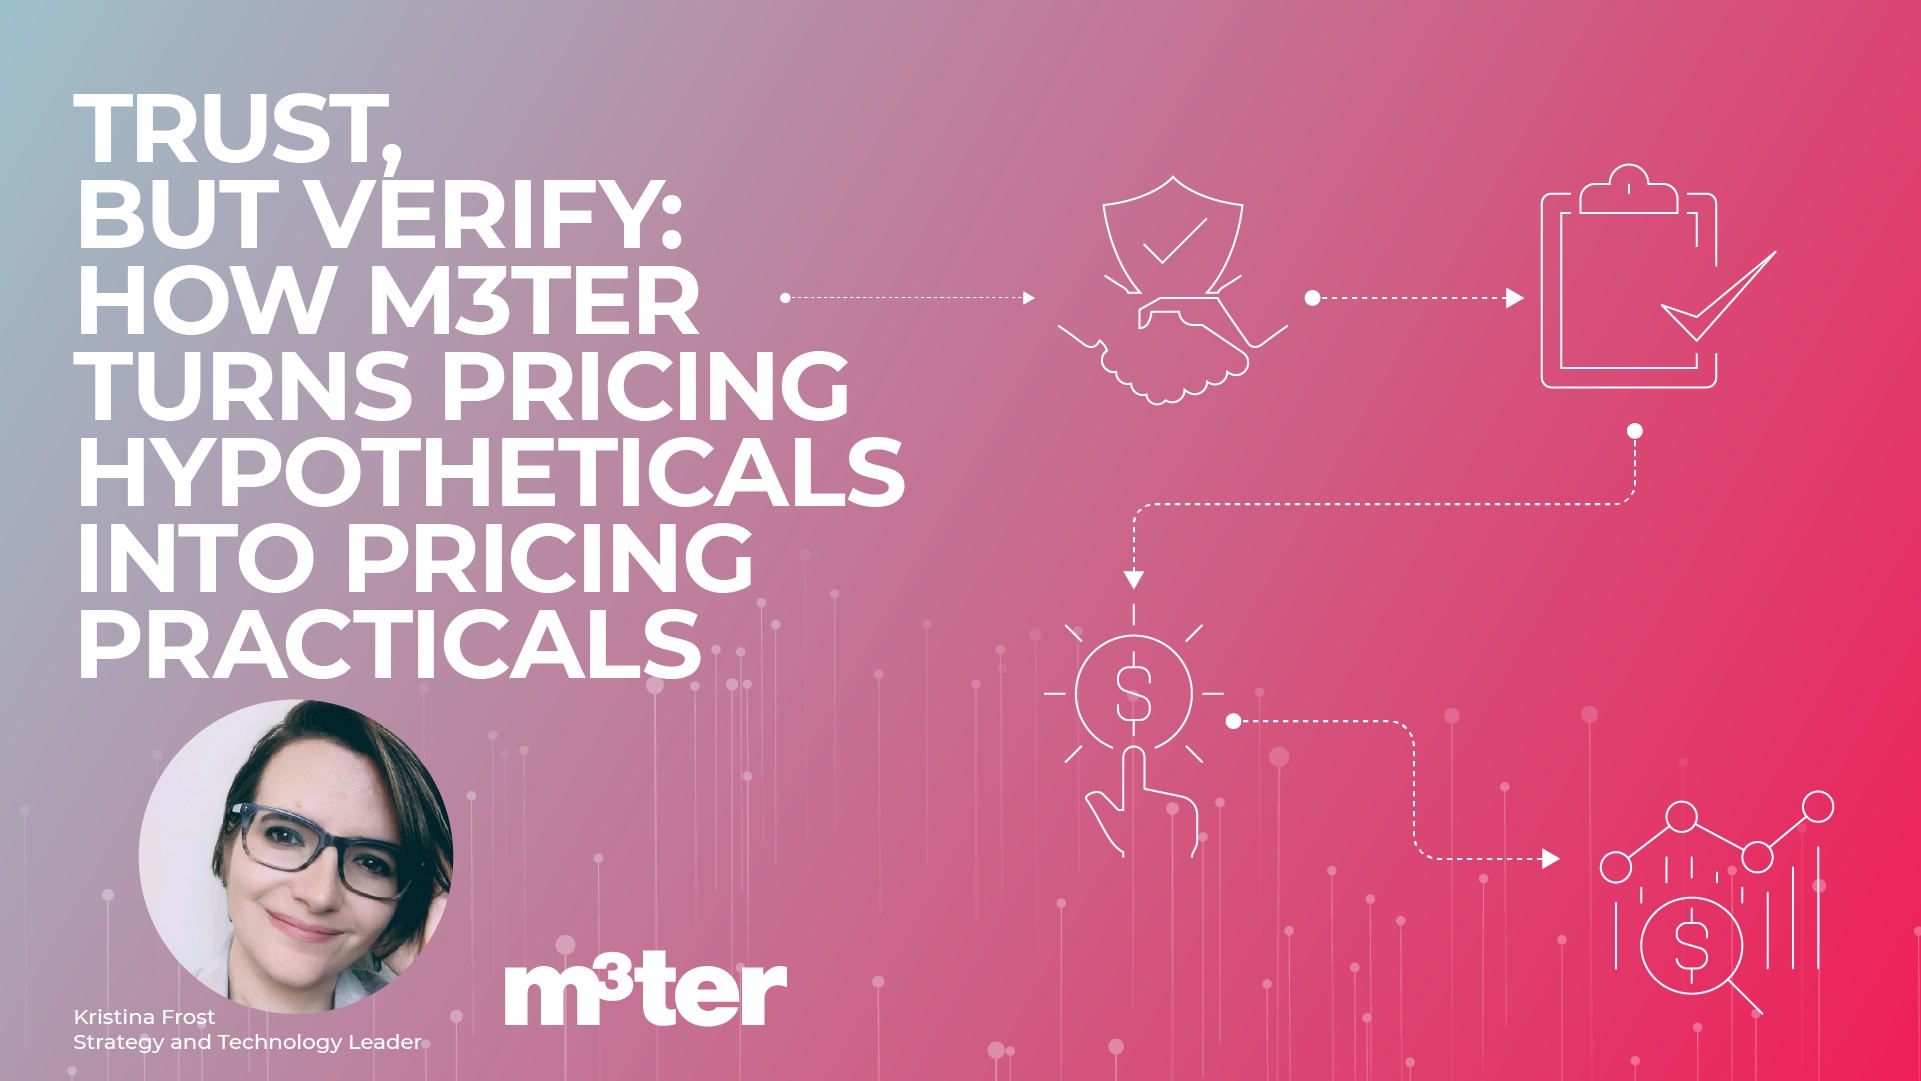 Trust, but verify: How m3ter turns pricing hypotheticals into pricing practicals | Cover Blog from Kristina Frost